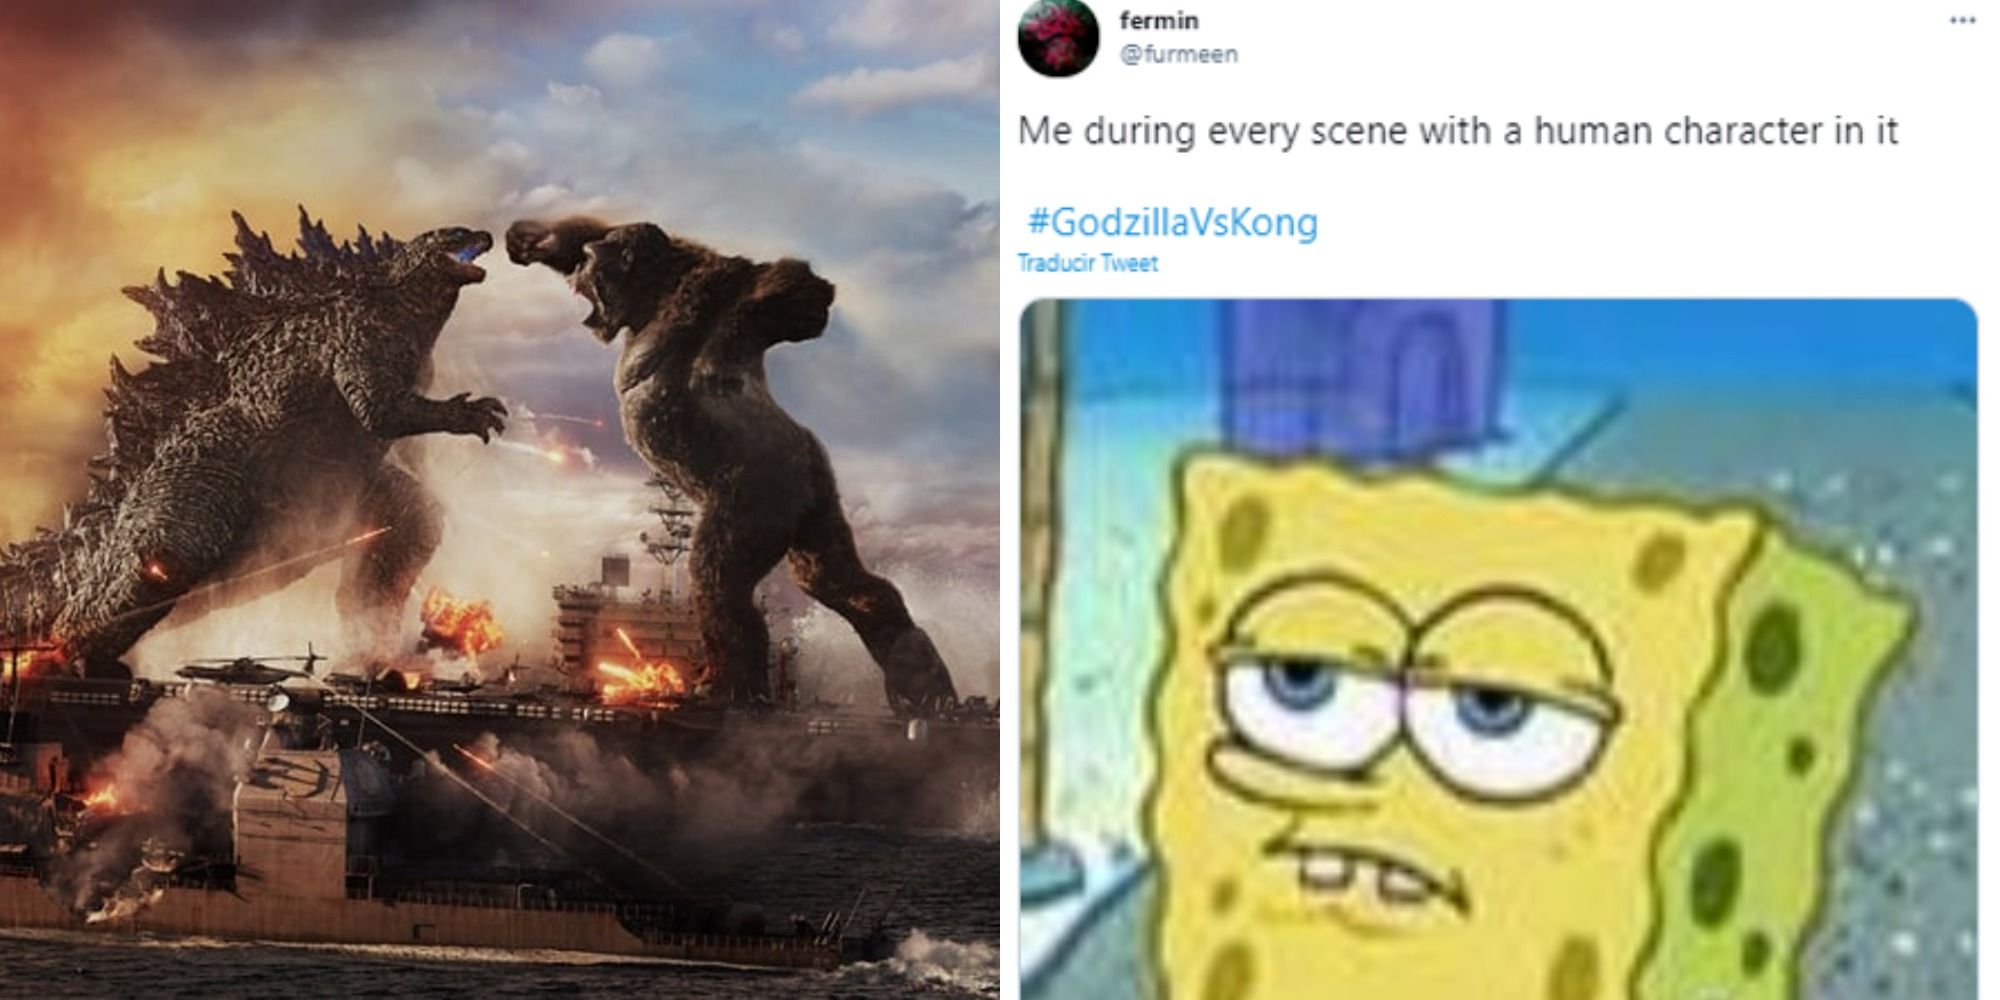 Split image showing Godzilla and Kong battling, and a meme about the movie